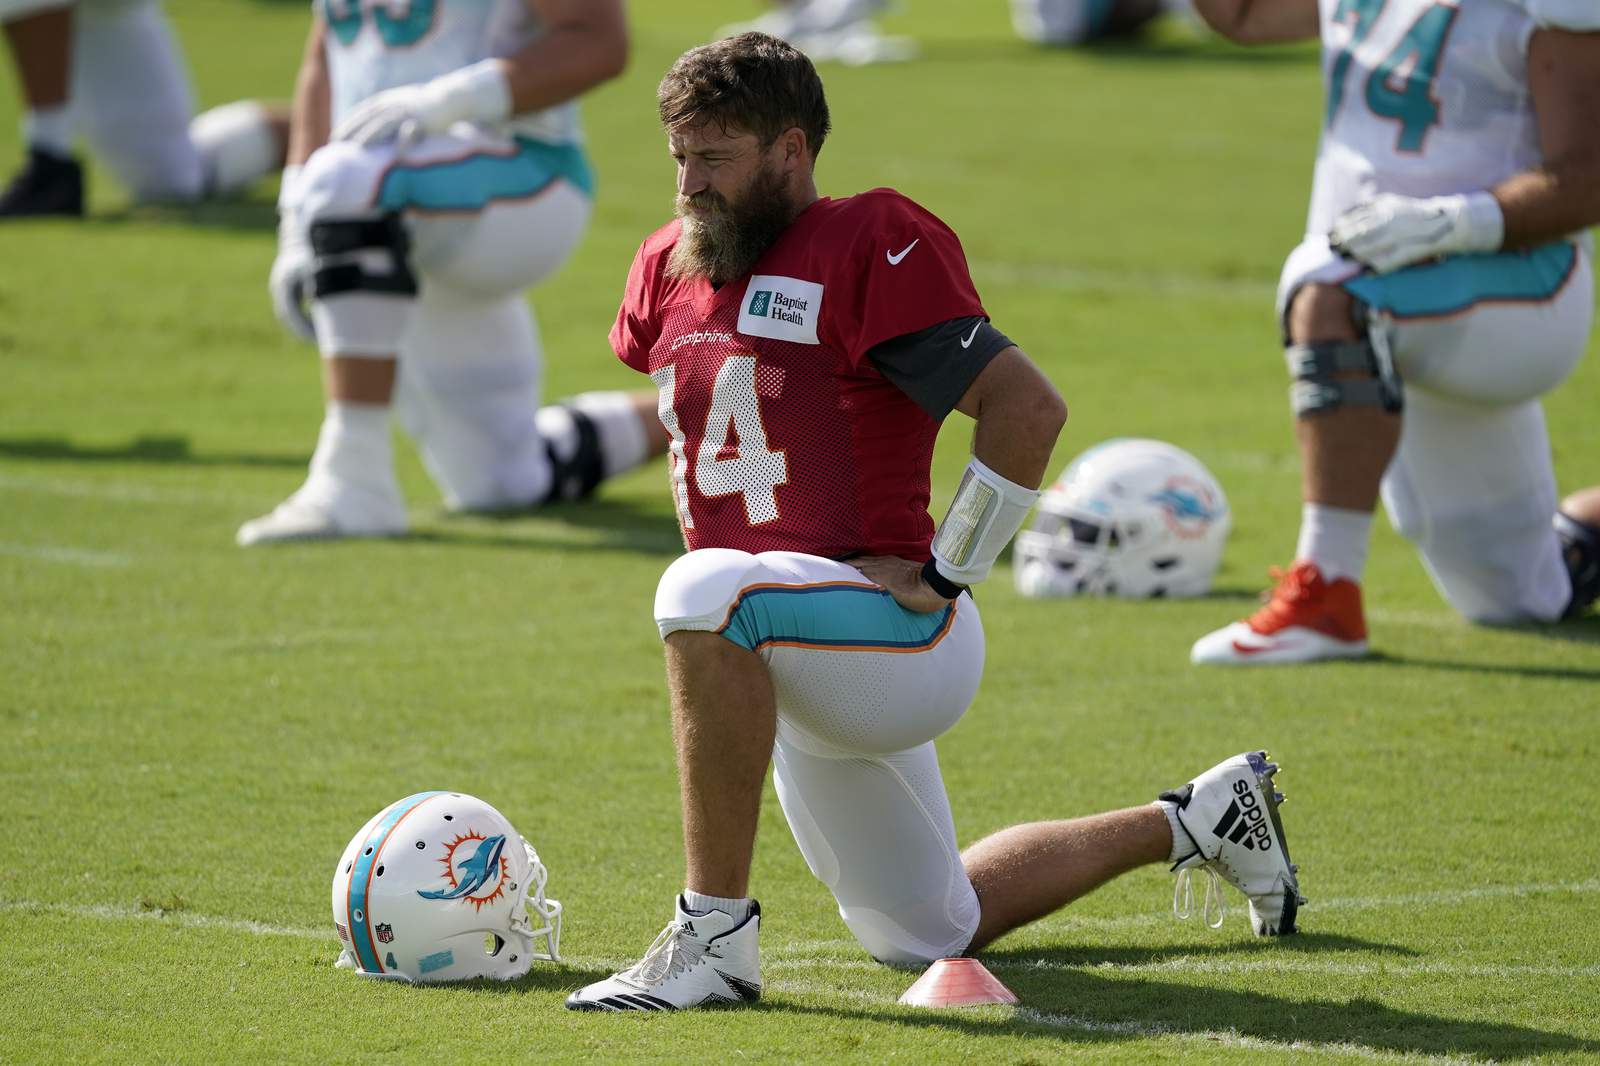 Fitzpatrick excited to start season as QB1 for Dolphins